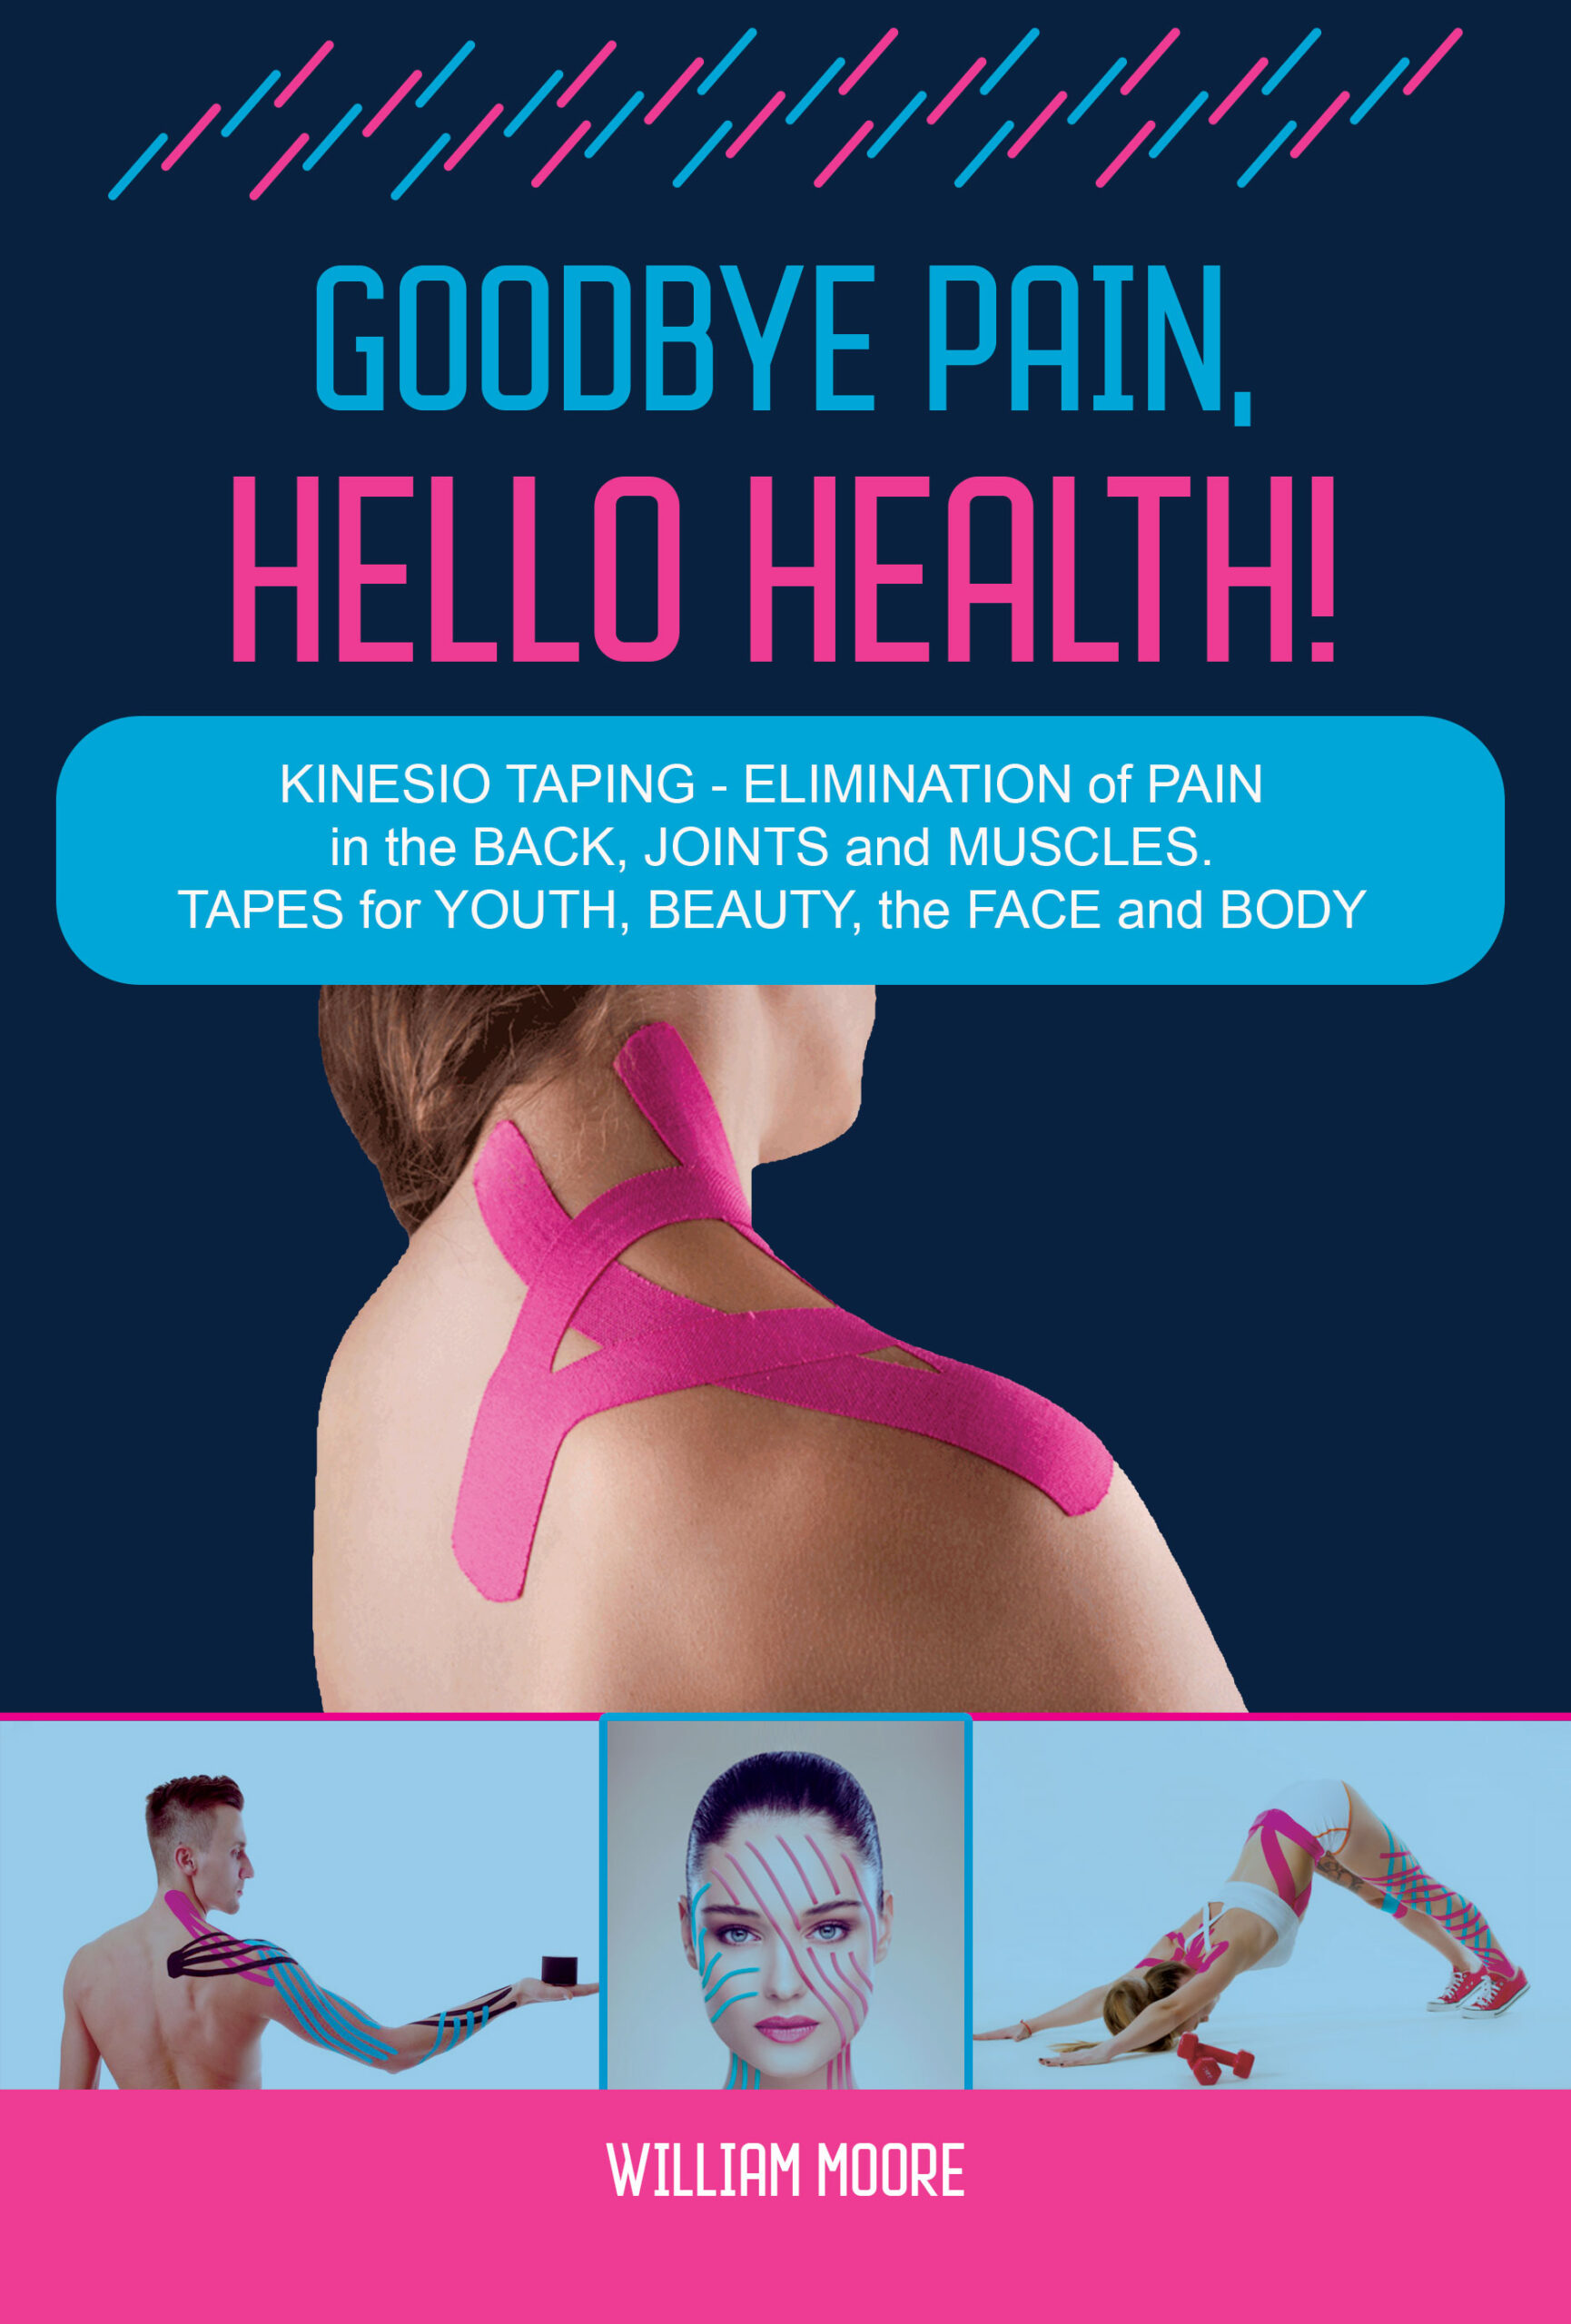 FREE: Goodbye Pain, Hello Health! by William Moore